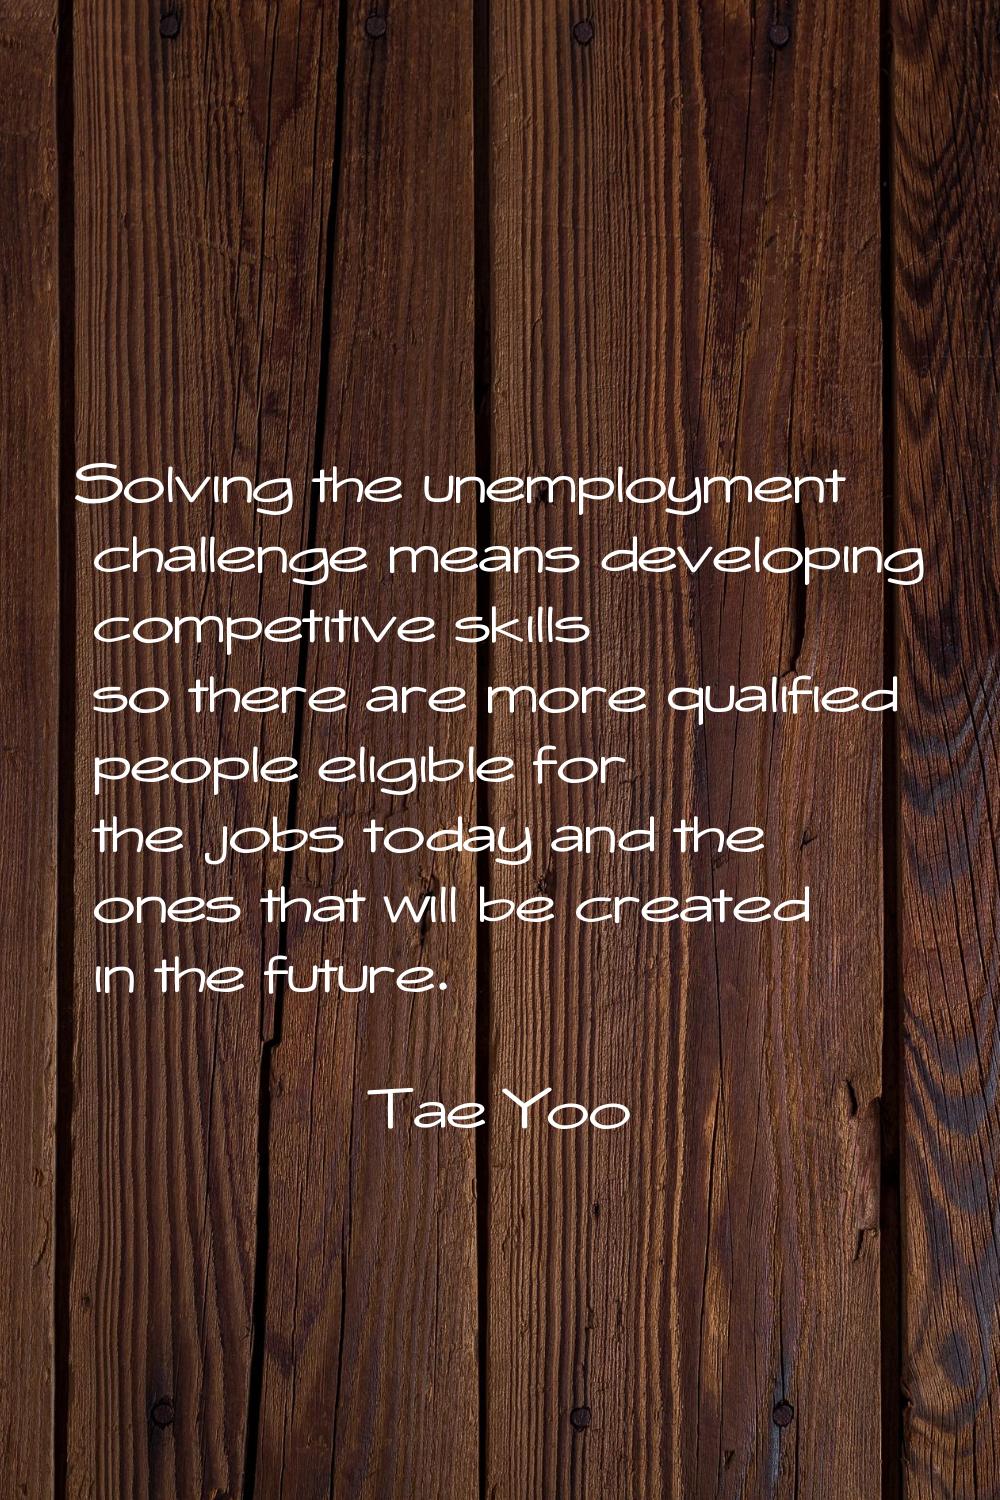 Solving the unemployment challenge means developing competitive skills so there are more qualified 